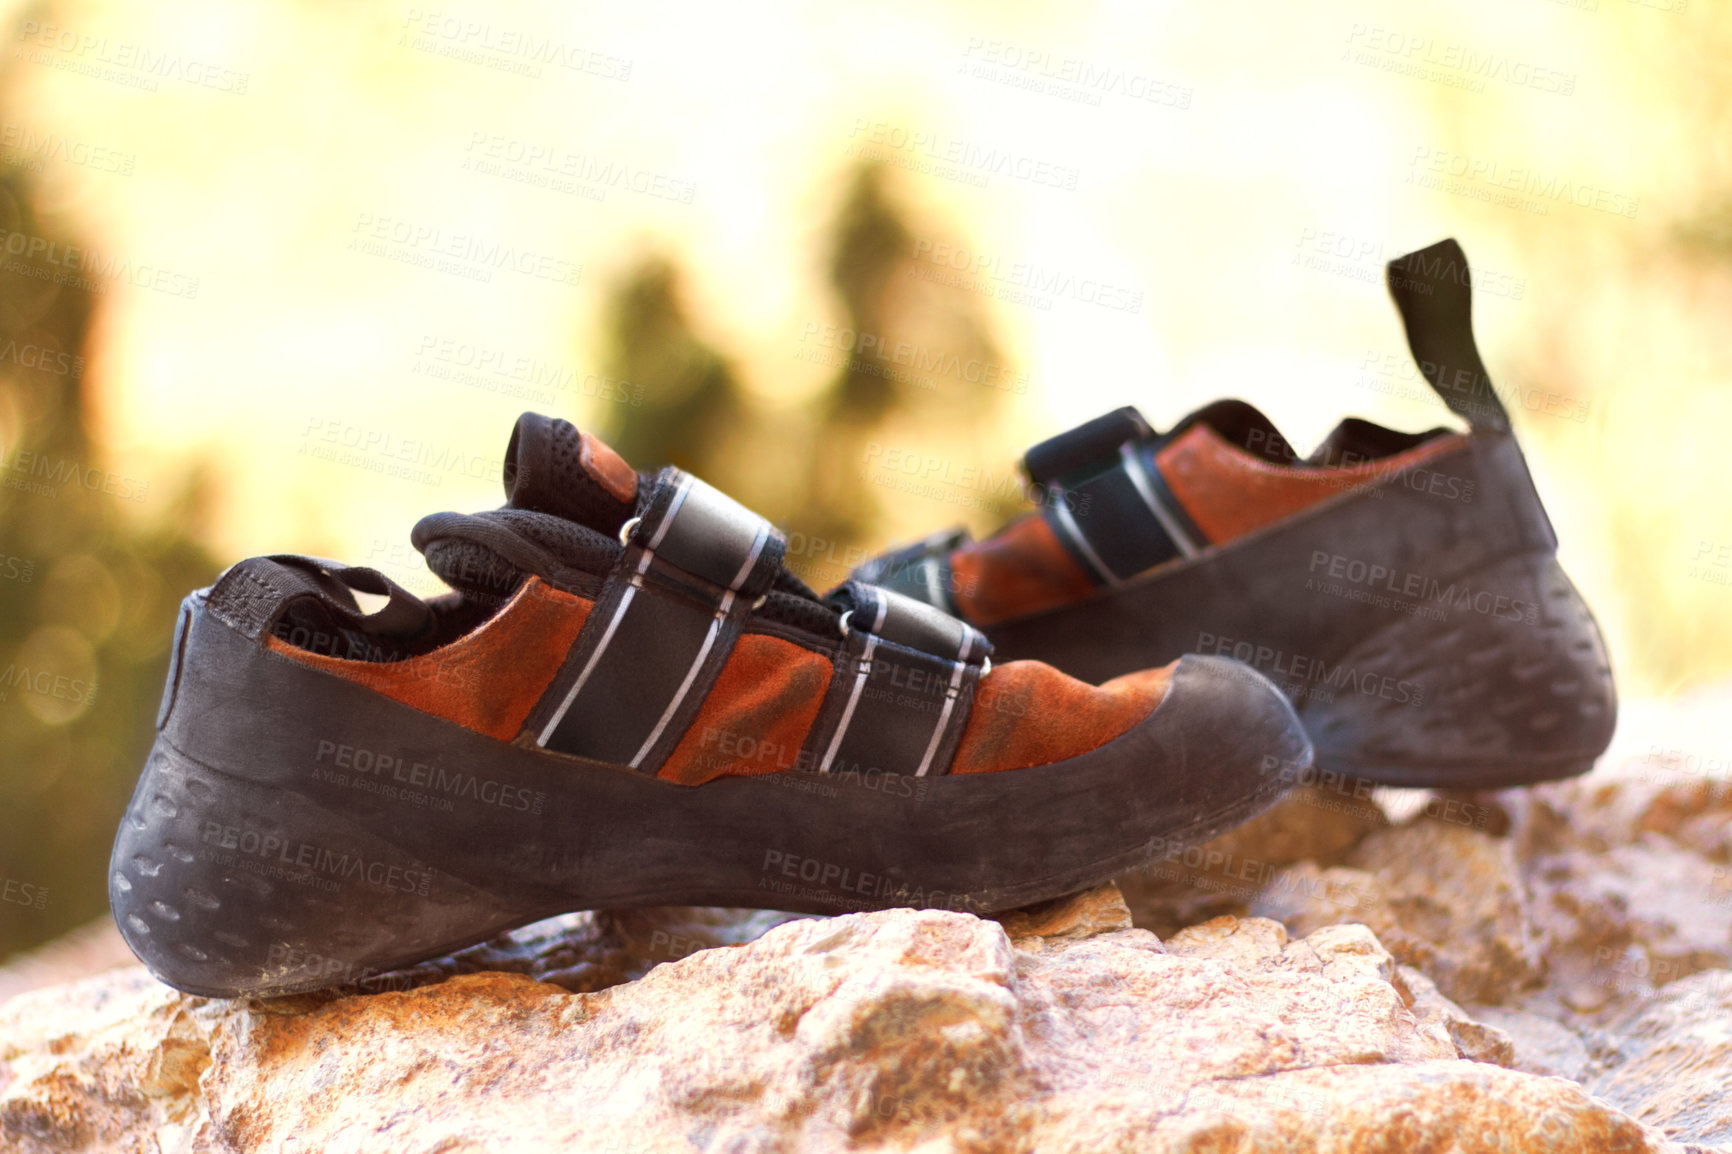 Buy stock photo Climbing shoes lying on a rock outdoors